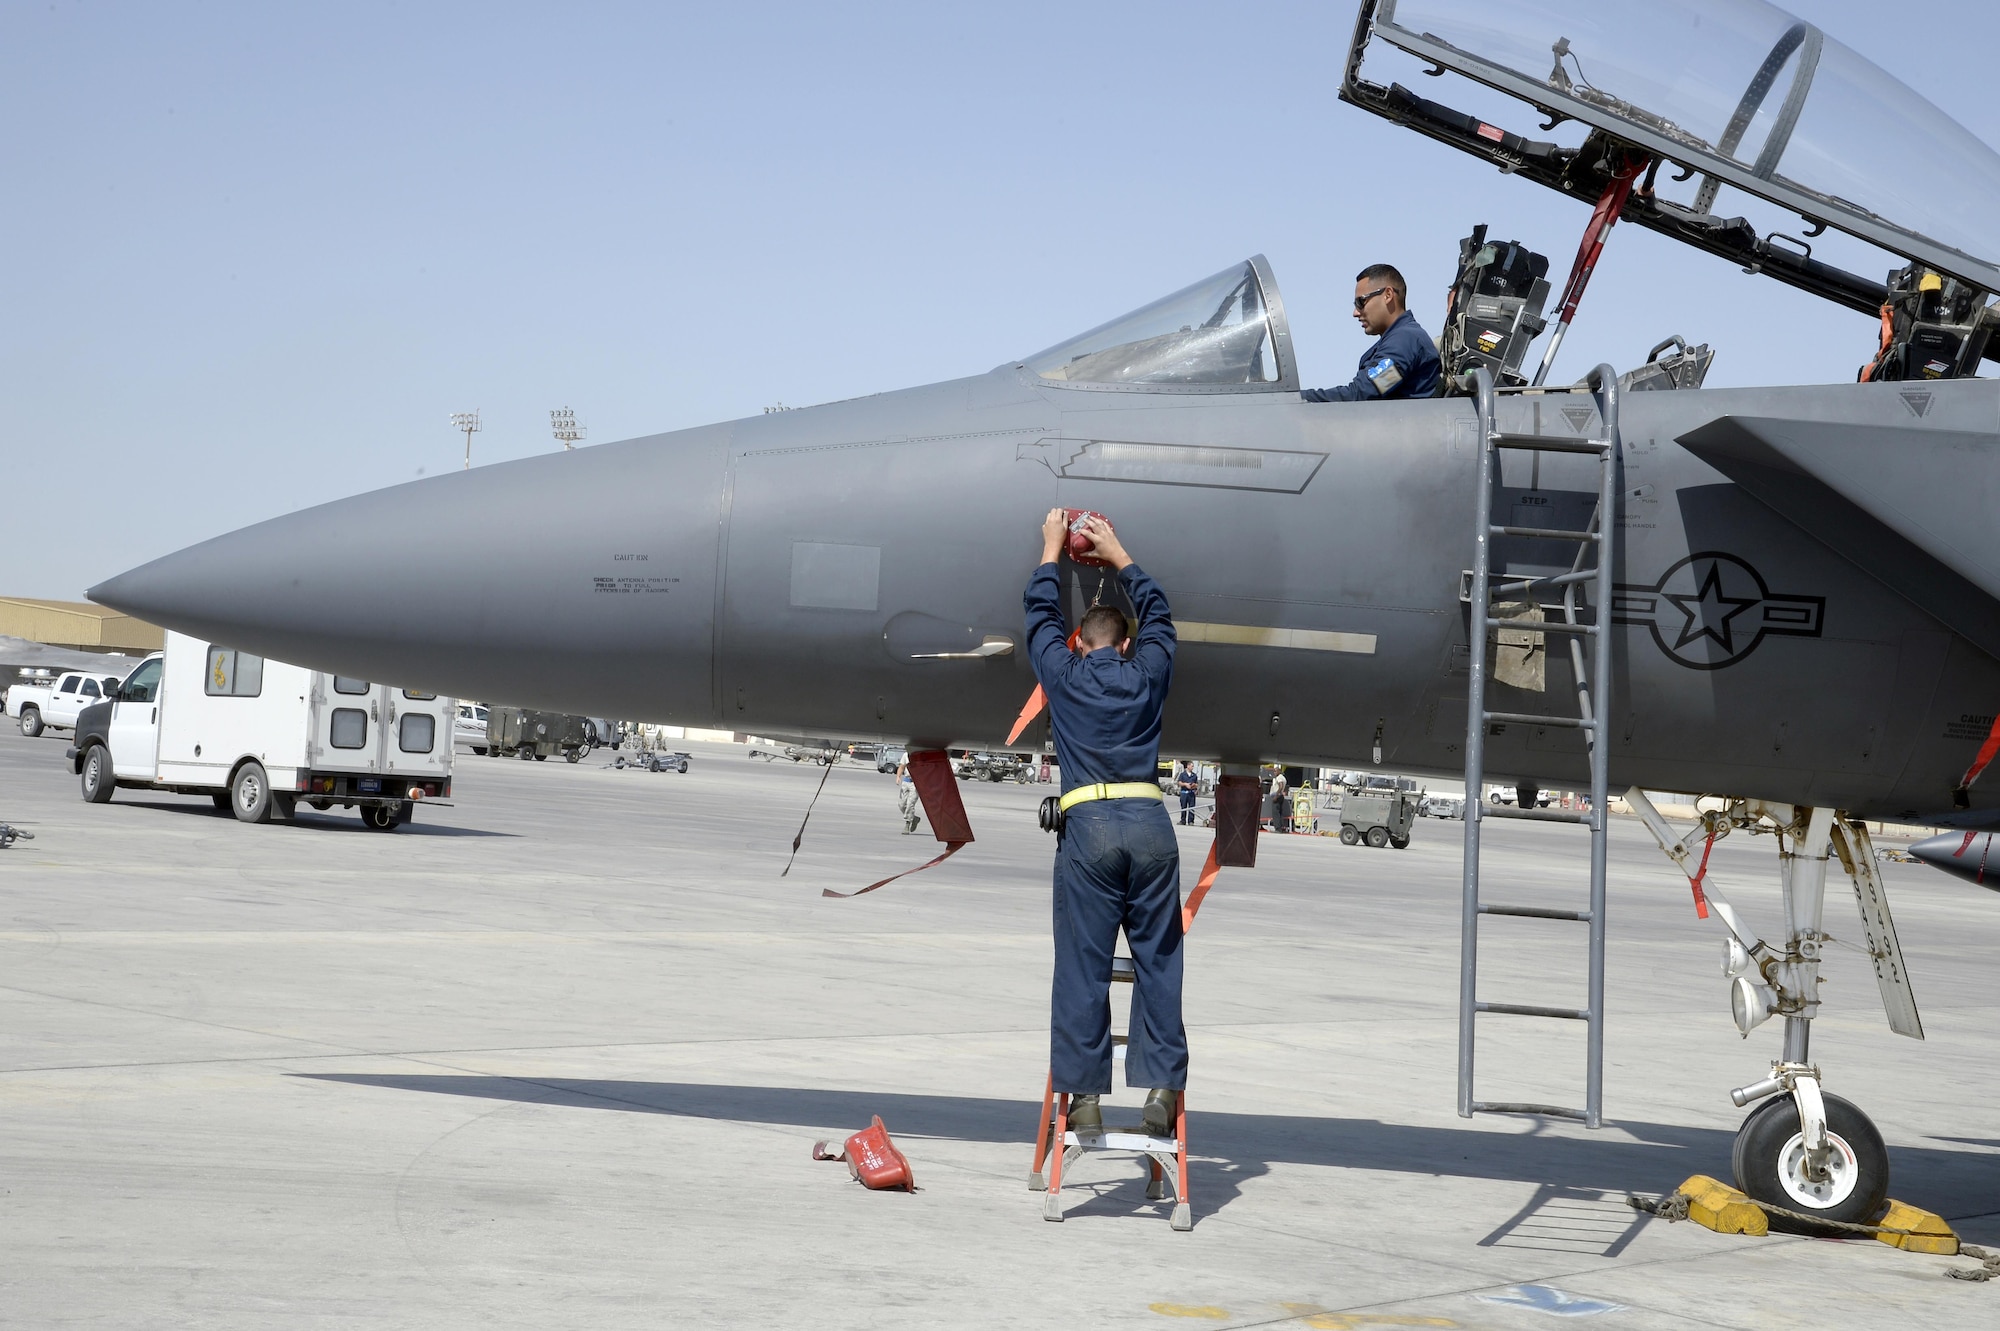 Staff Sgt Omar, top, and Staff Sgt. Jared, F-15E crew chiefs, are preparing the aircraft safe for maintenance during a post-flight inspection at an undisclosed location in Southwest Asia Feb. 25, 2015. The F-15E Strike Eagle is a dual-role fighter designed to perform air-to-air and air-to-ground missions. Both Airmen are currently deployed from Seymour Johnson Air Force Base, N.C. (U.S. Air Force photo/Tech. Sgt. Marie Brown)